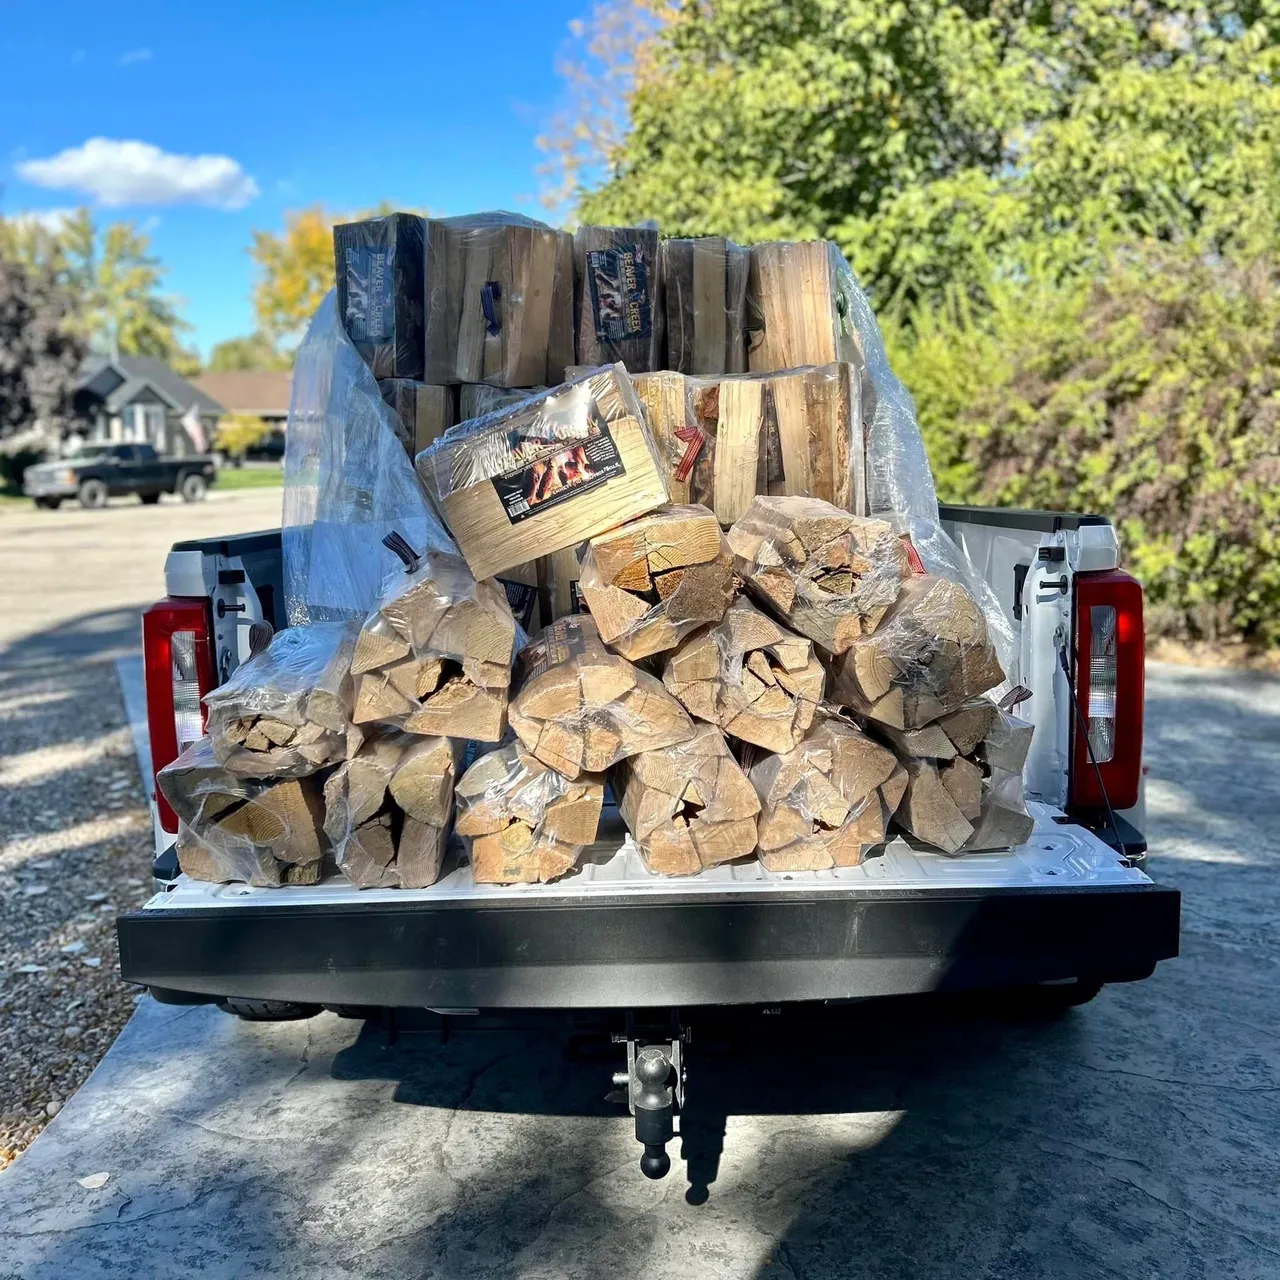 A truck with firewood in the back of it.